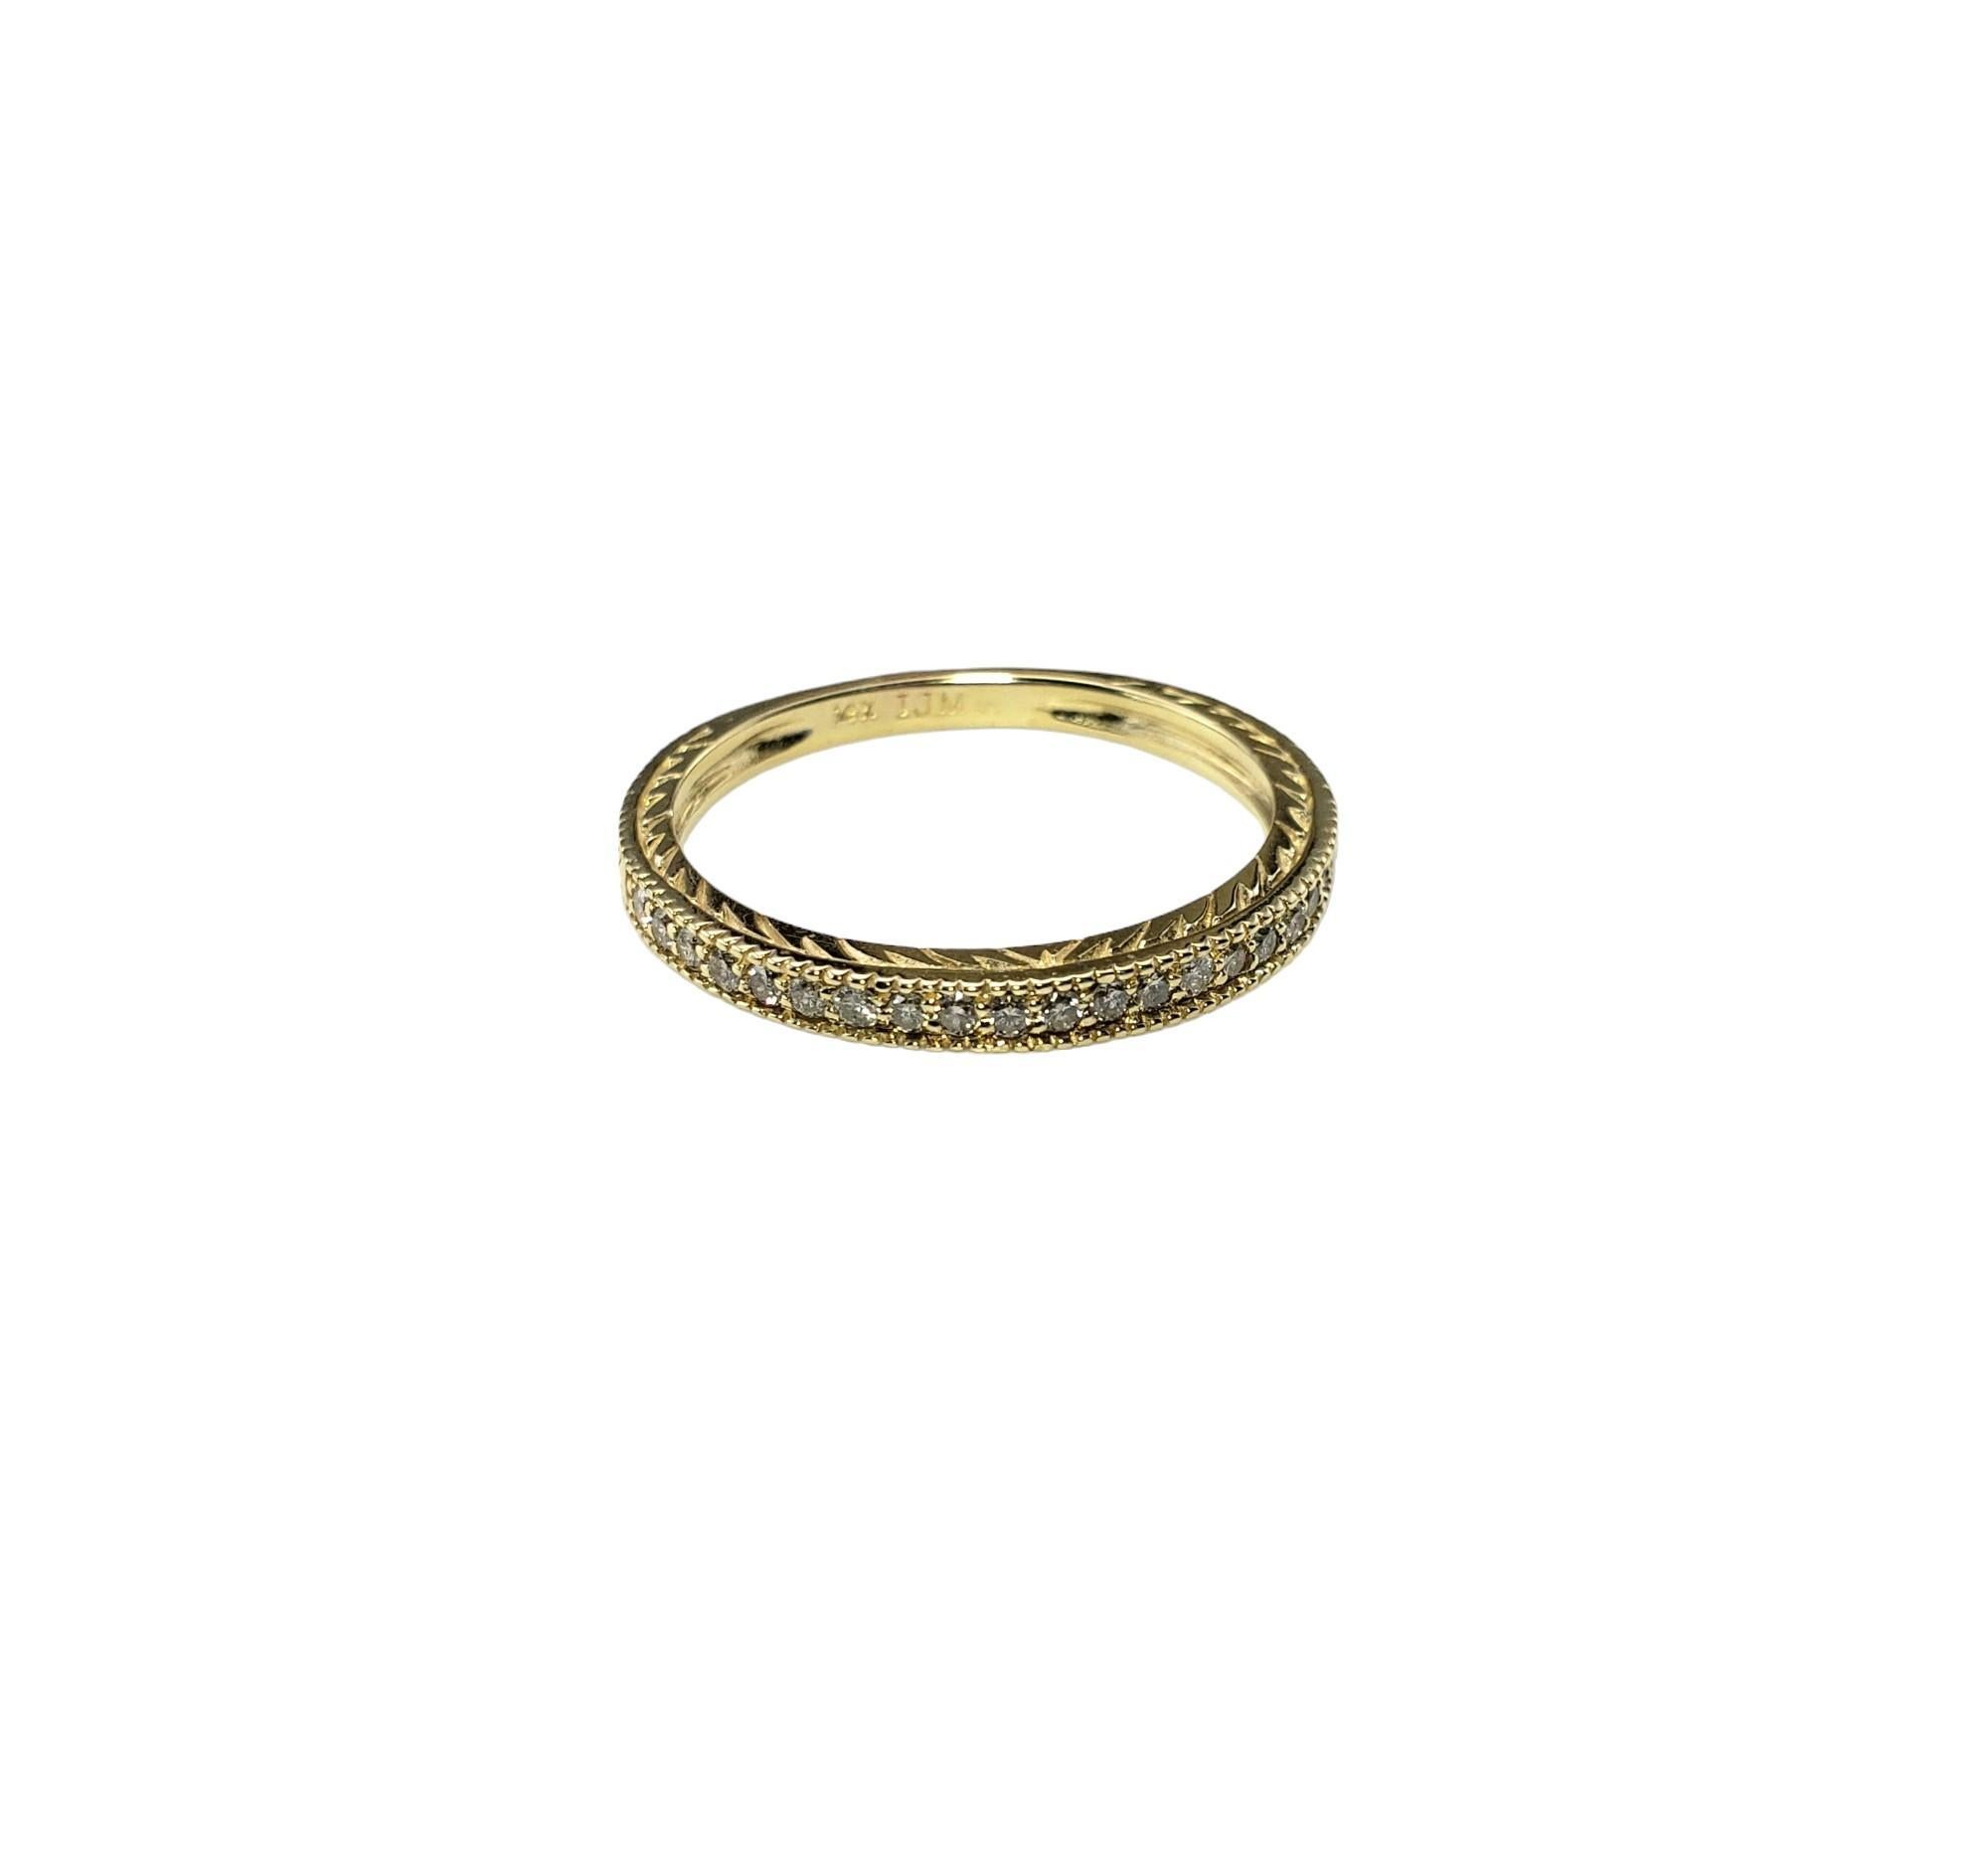 Vintage 14 Karat Yellow Gold and Diamond Band Ring Size 9-

This sparkling band features 20 round brilliant cut diamonds set in beautifully detailed 14K yellow gold. Width: 2 mm.

Approximate total diamond weight: .20 ct.

Diamond color: